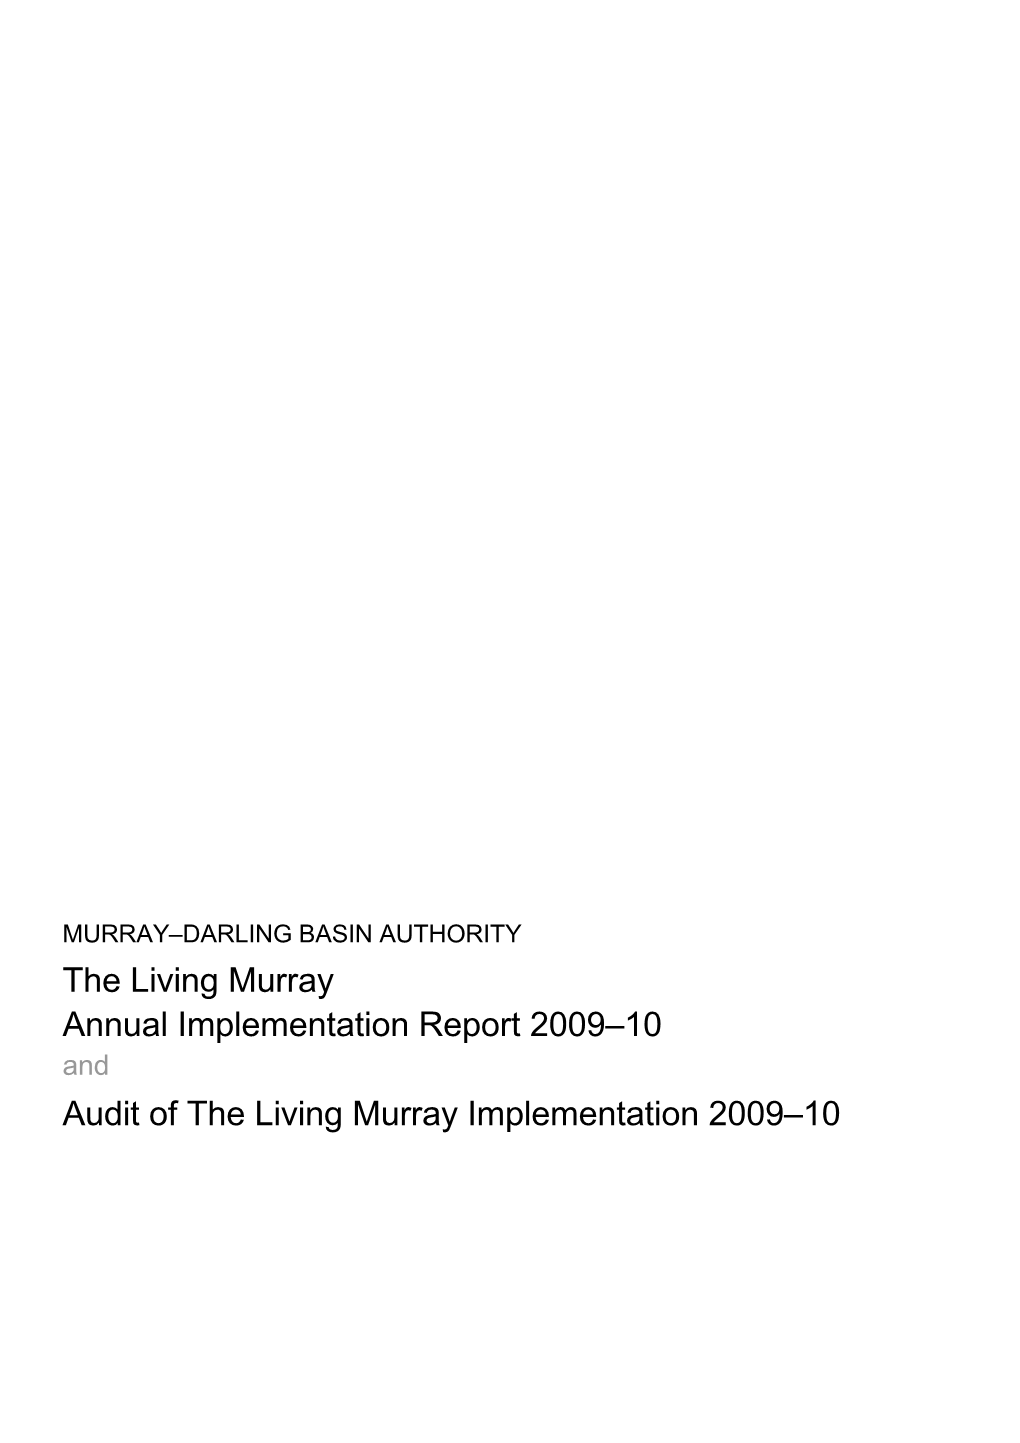 The Living Murray Annual Implementation Report 2009 10 and Audit of the Living Murray